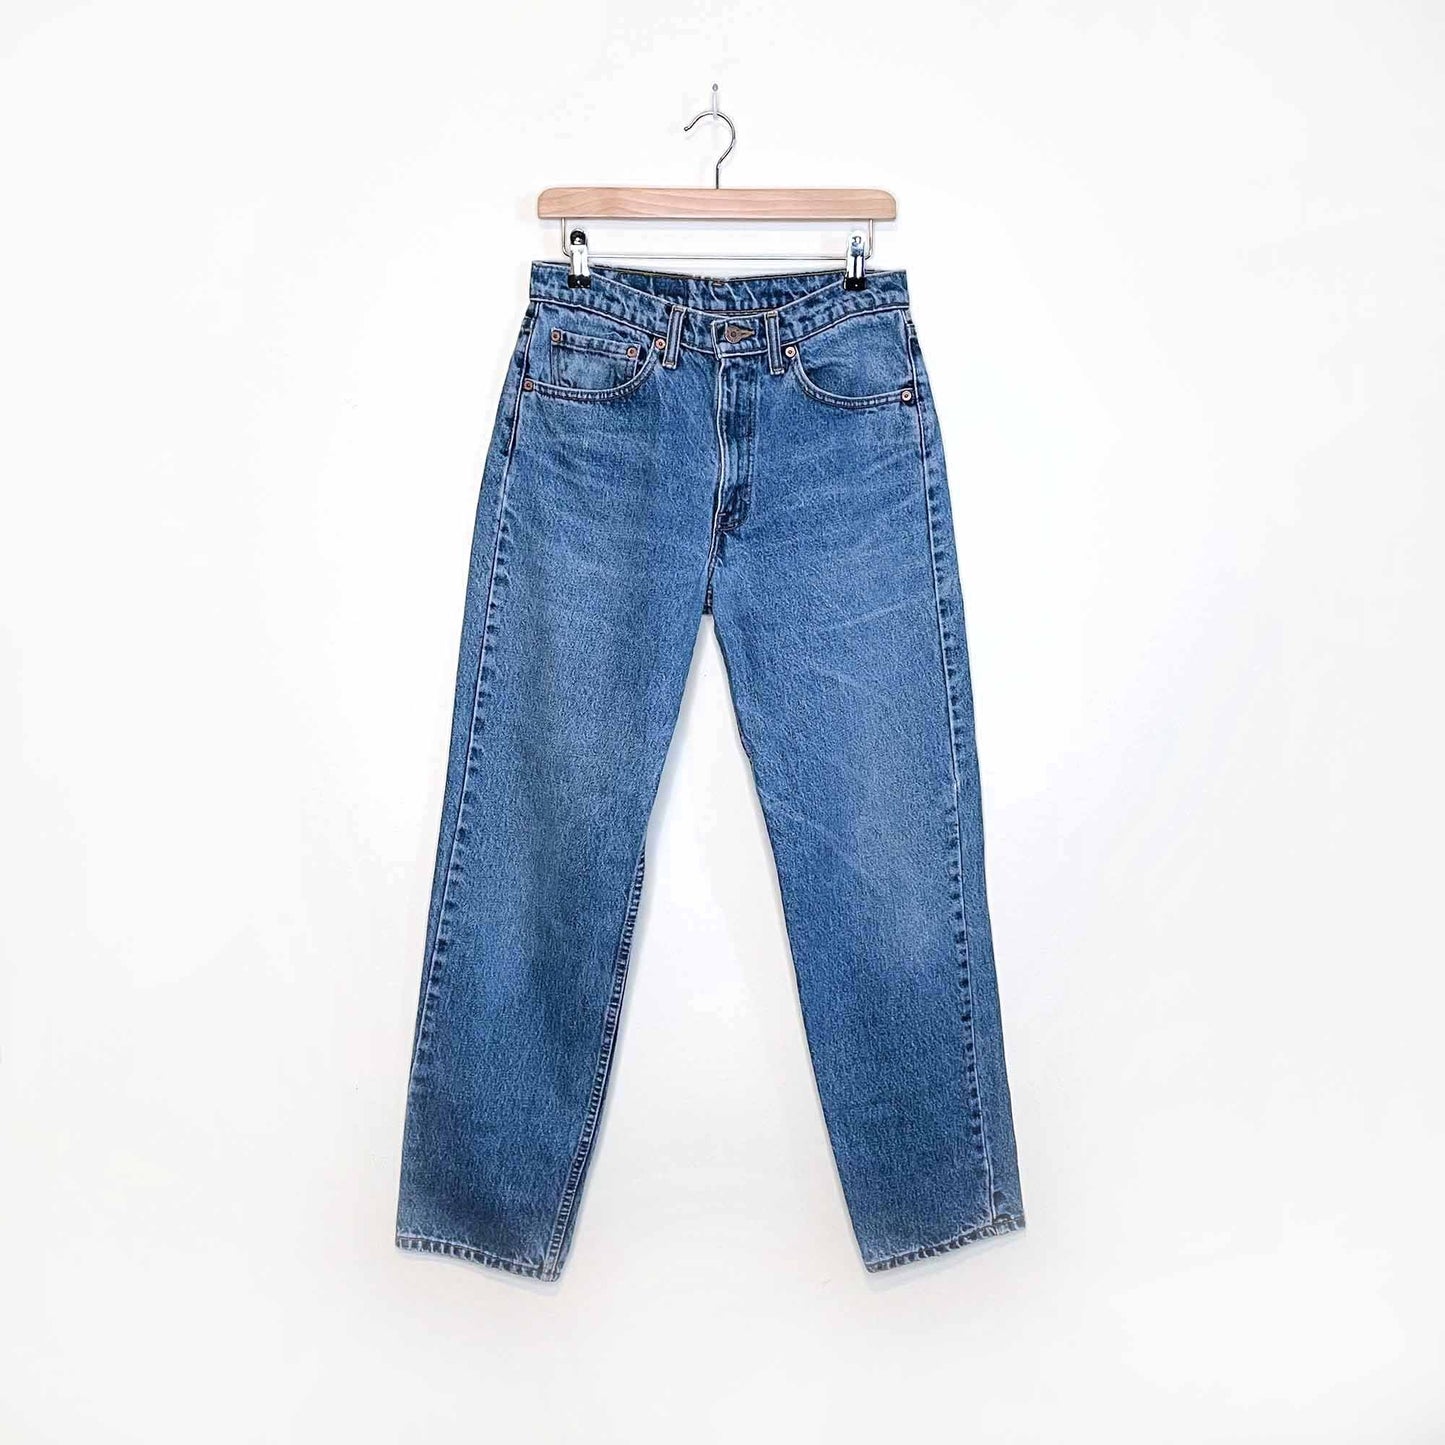 levi's 555 rare 'guys fit' relaxed high rise 90's jeans - size 32 (fits like a 27/28)